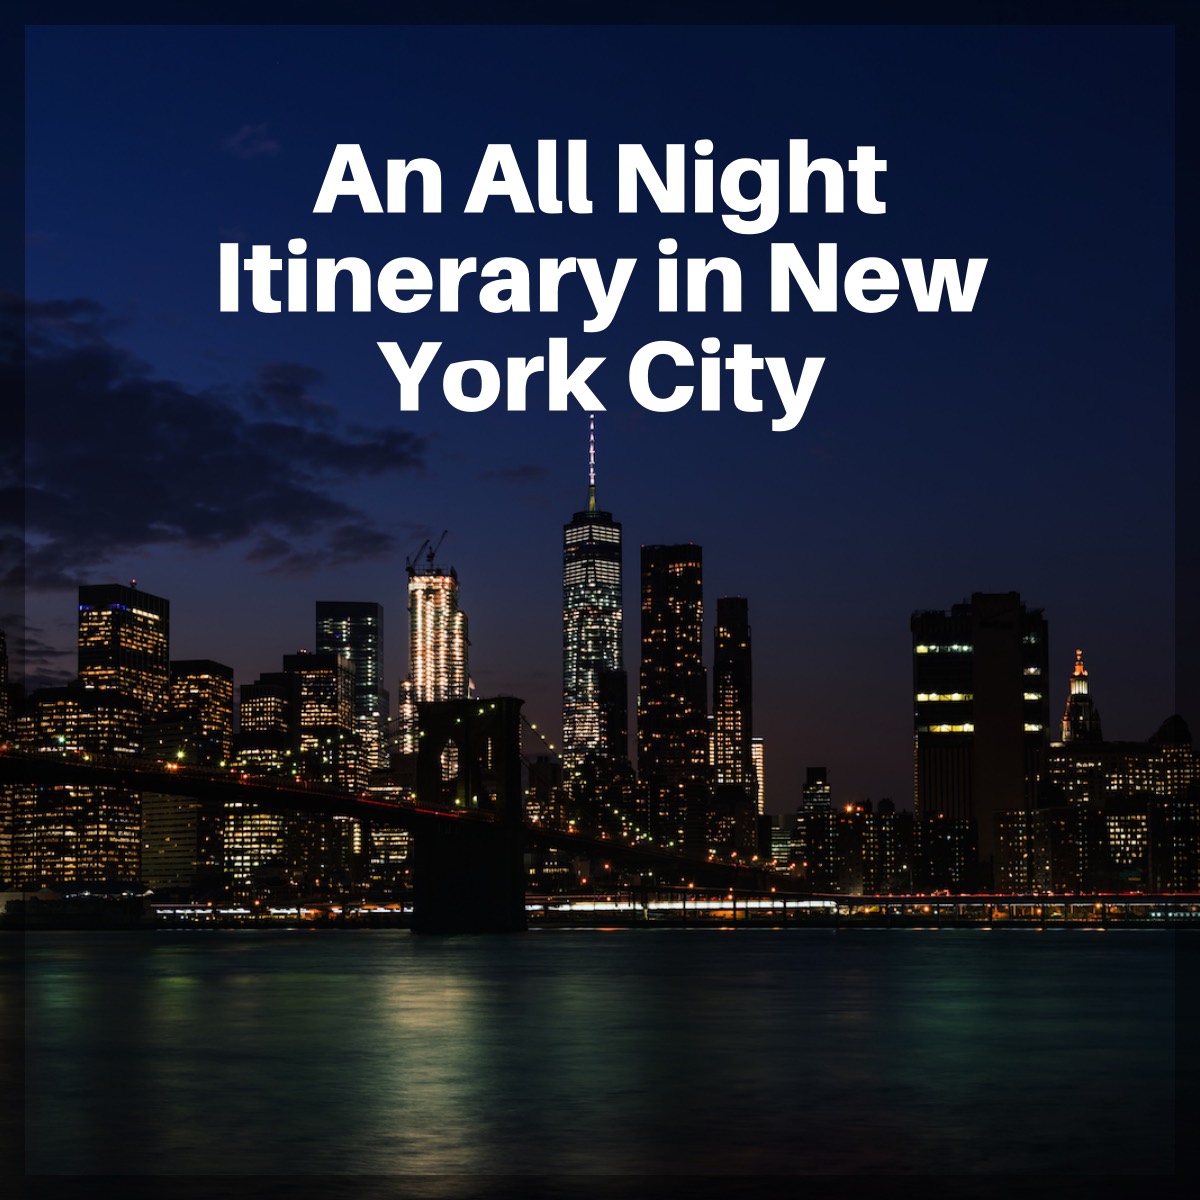 An All Night Itinerary in New York City